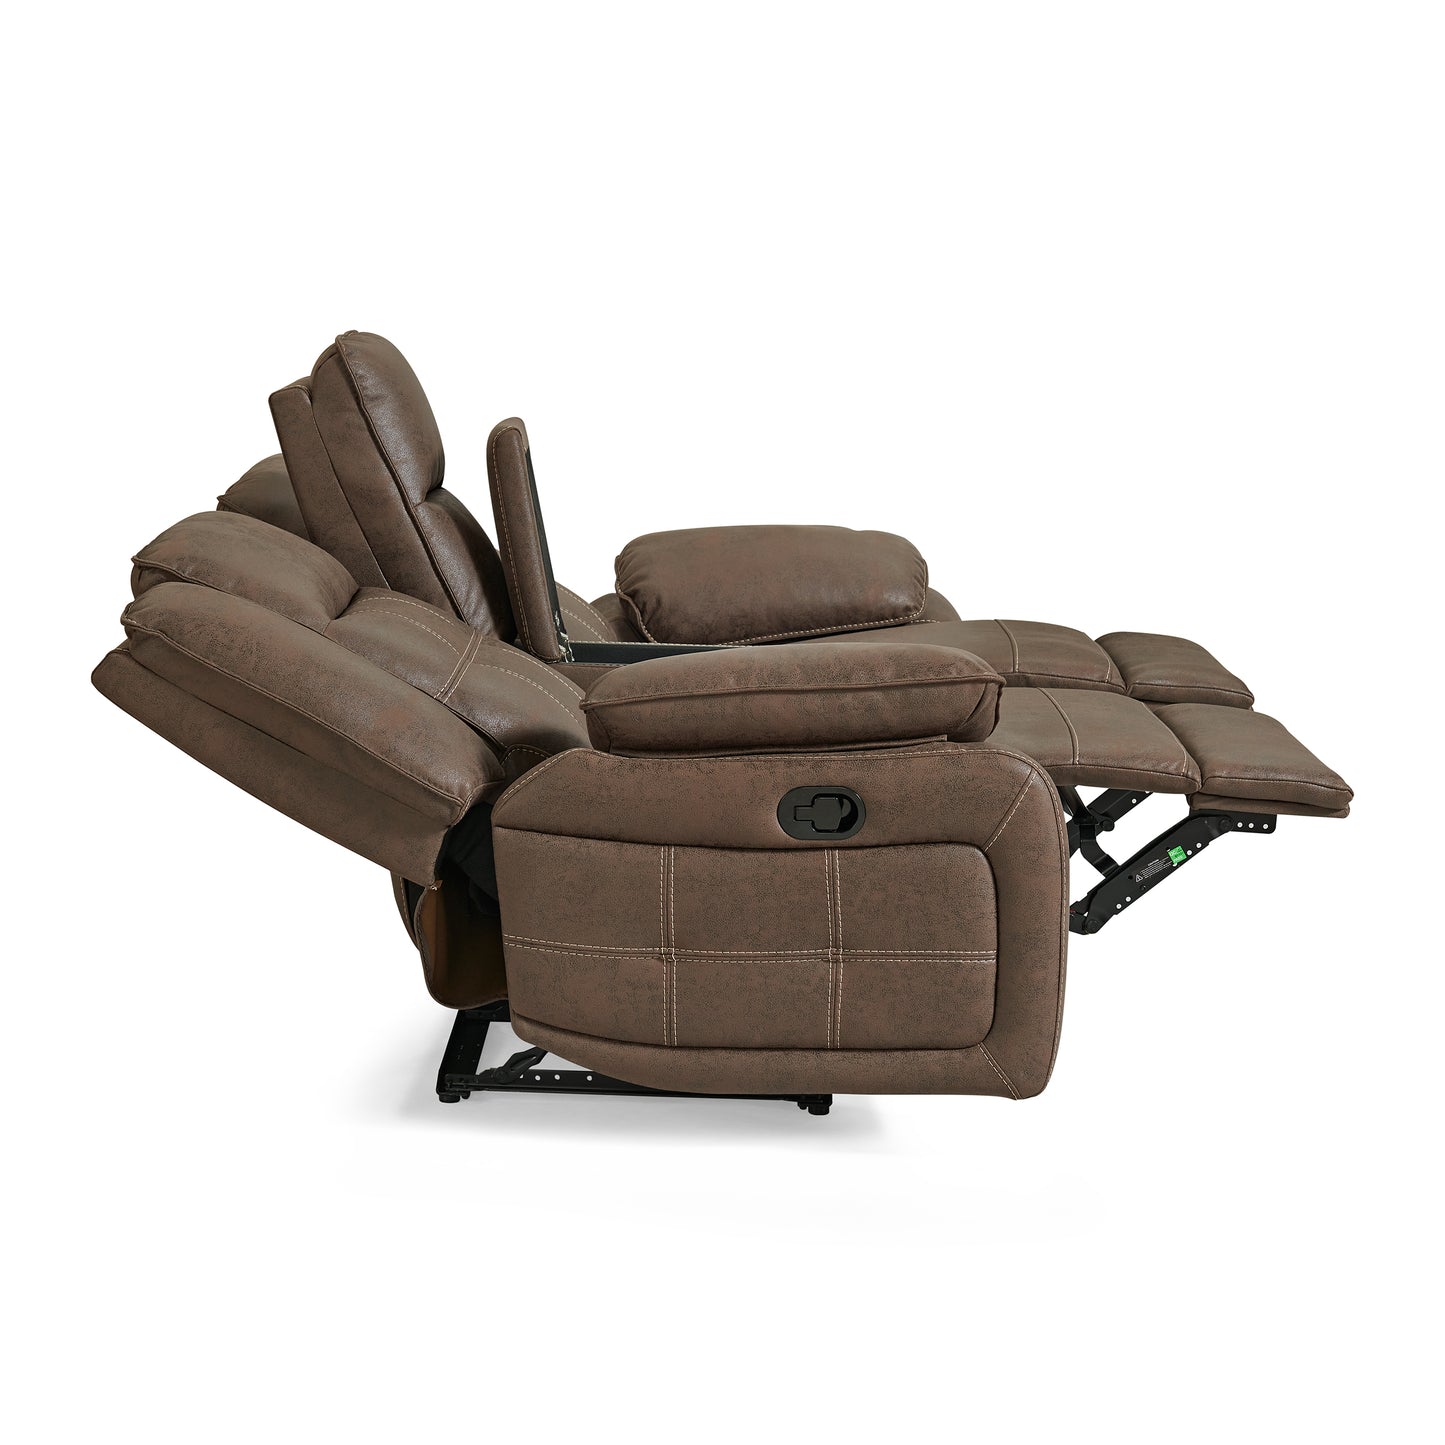 Lesley Transitional Manual Reclining Loveseat, with Cup holders, Brown